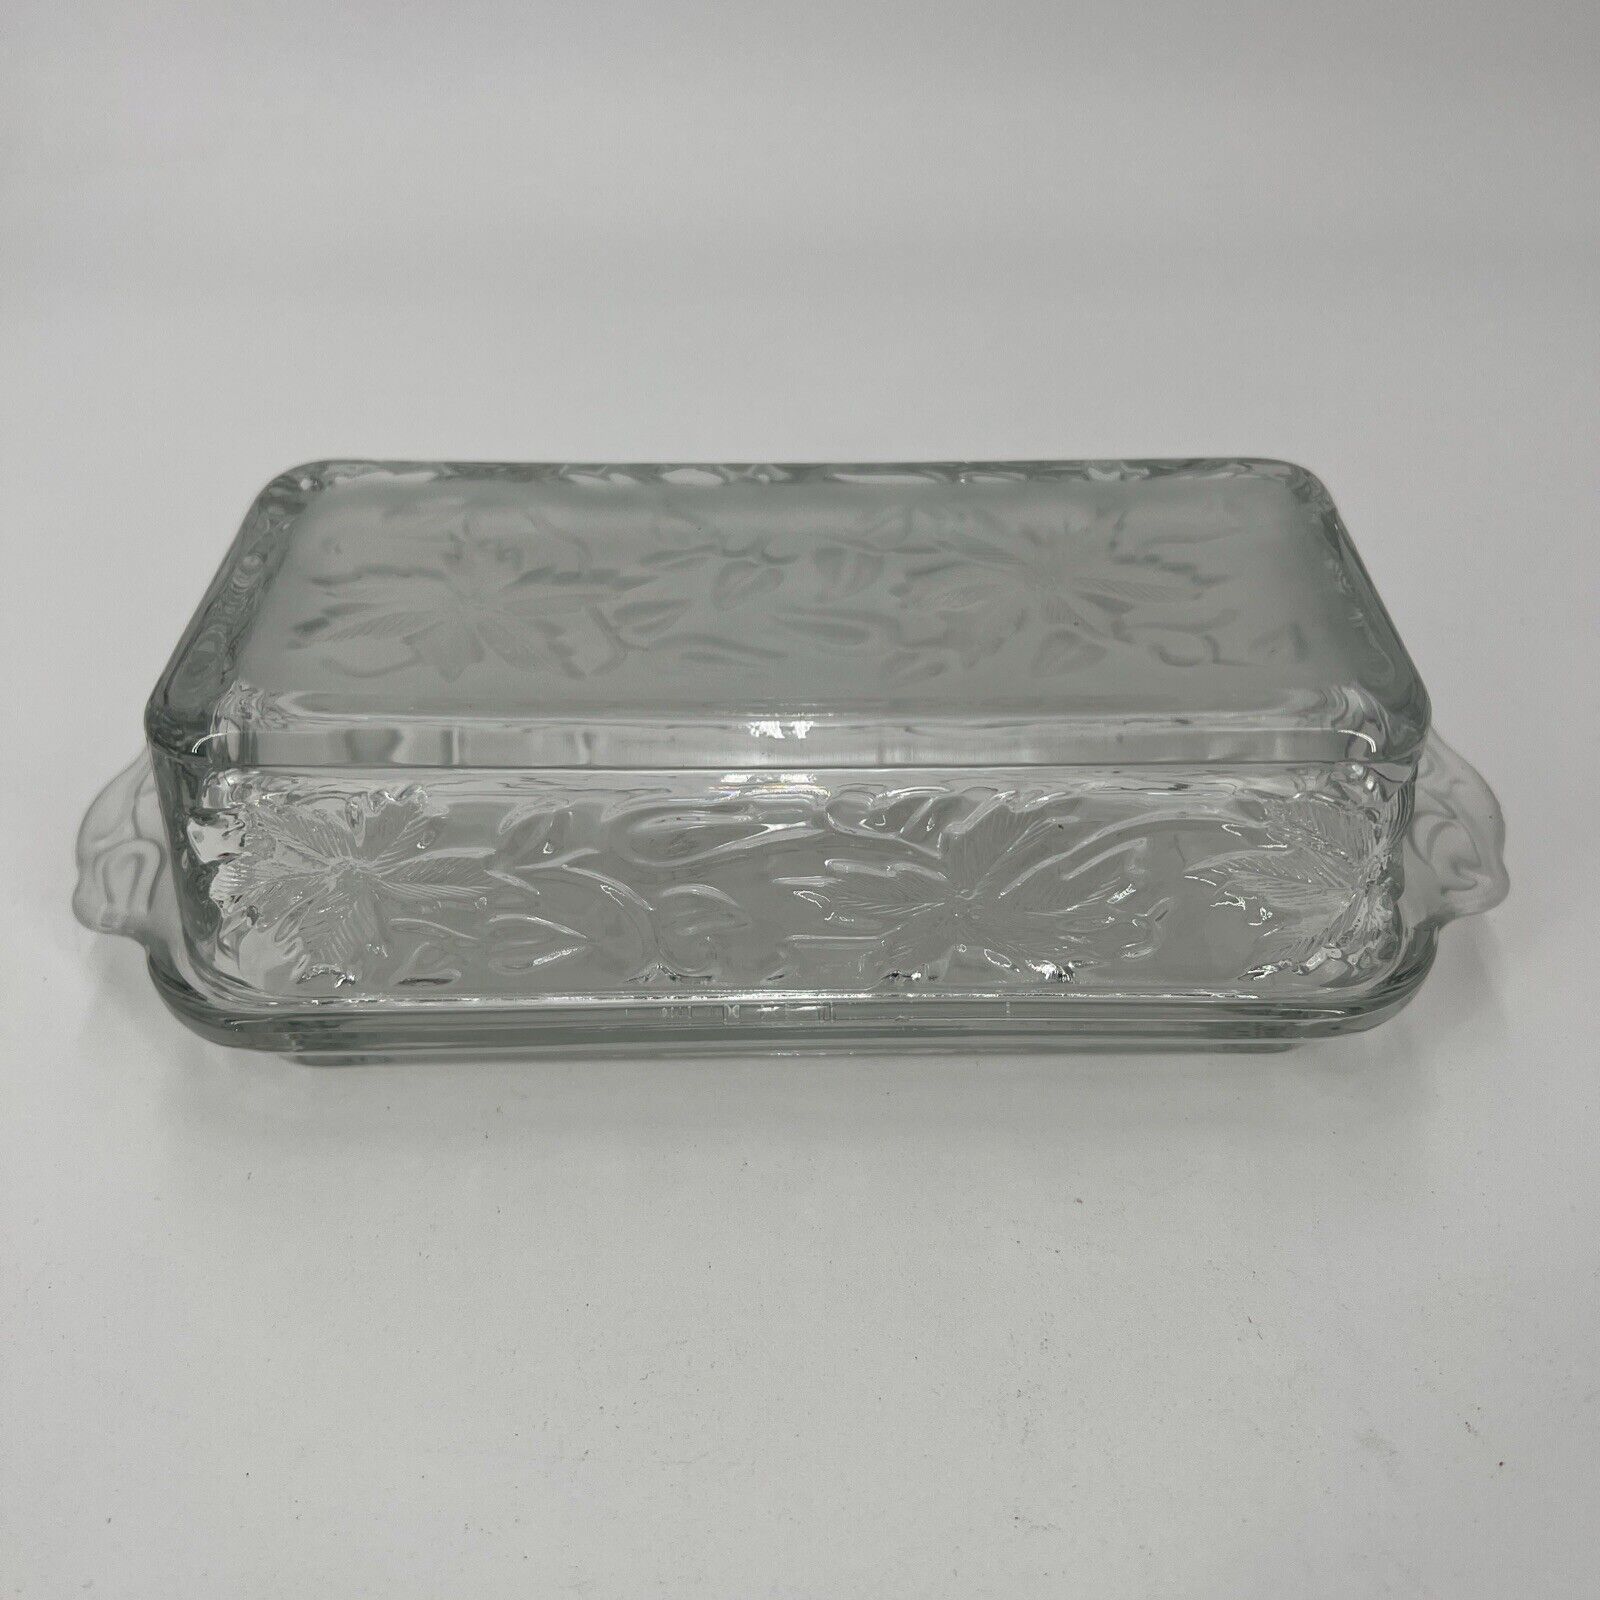 PV09174 Vintage Princess House Frosted FANTASIA / POINSETTIA Covered Butter Dish